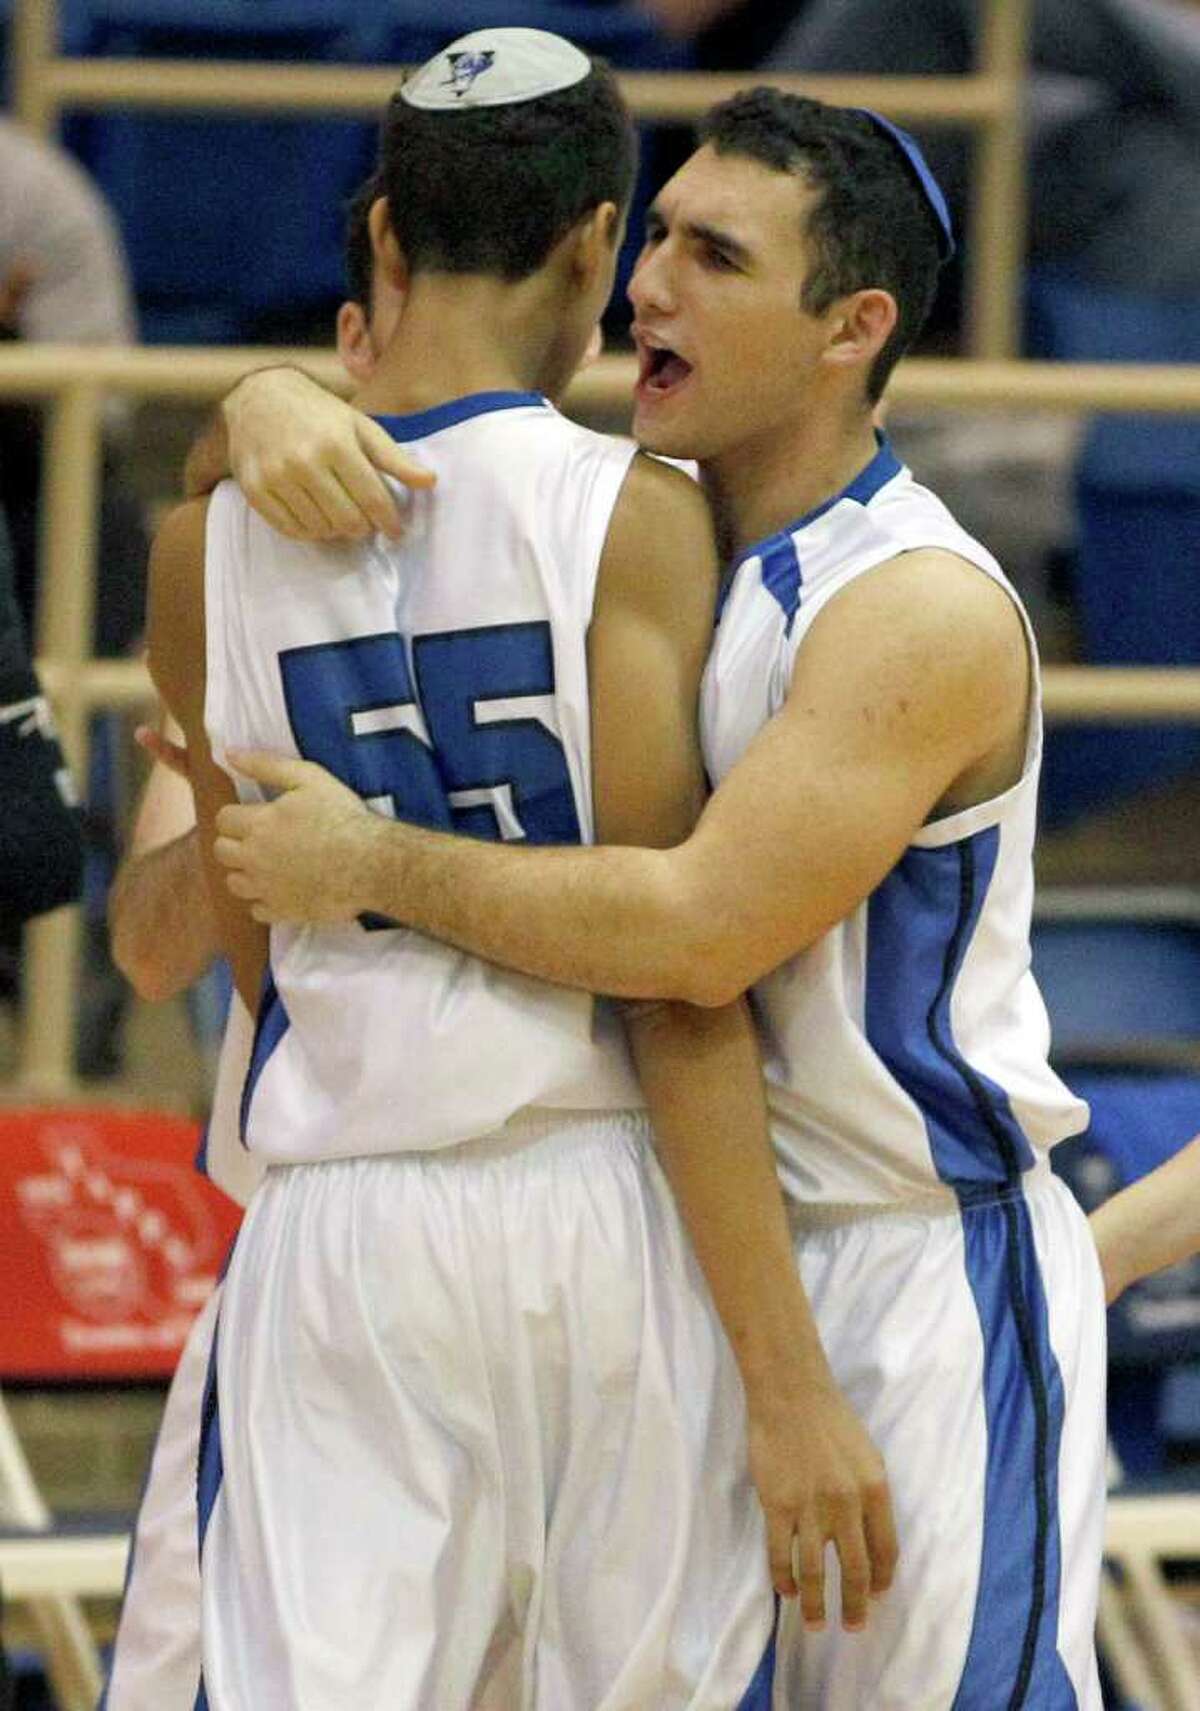 Beren Academy's Aaron Hakakian, right, hugs teammate Drayton Ratcliff (55) during the first half of a high school basketball game against Dallas Covenant in Fort Worth, Texas on Friday, March 2, 2012. The Orthodox Jewish school played an afternoon playoff game that was rescheduled so it doesn't conflict with the Sabbath. The Texas Association of Private and Parochial Schools made the change after first rejecting appeals from Beren Academy to move the game. Beren won 58-46.